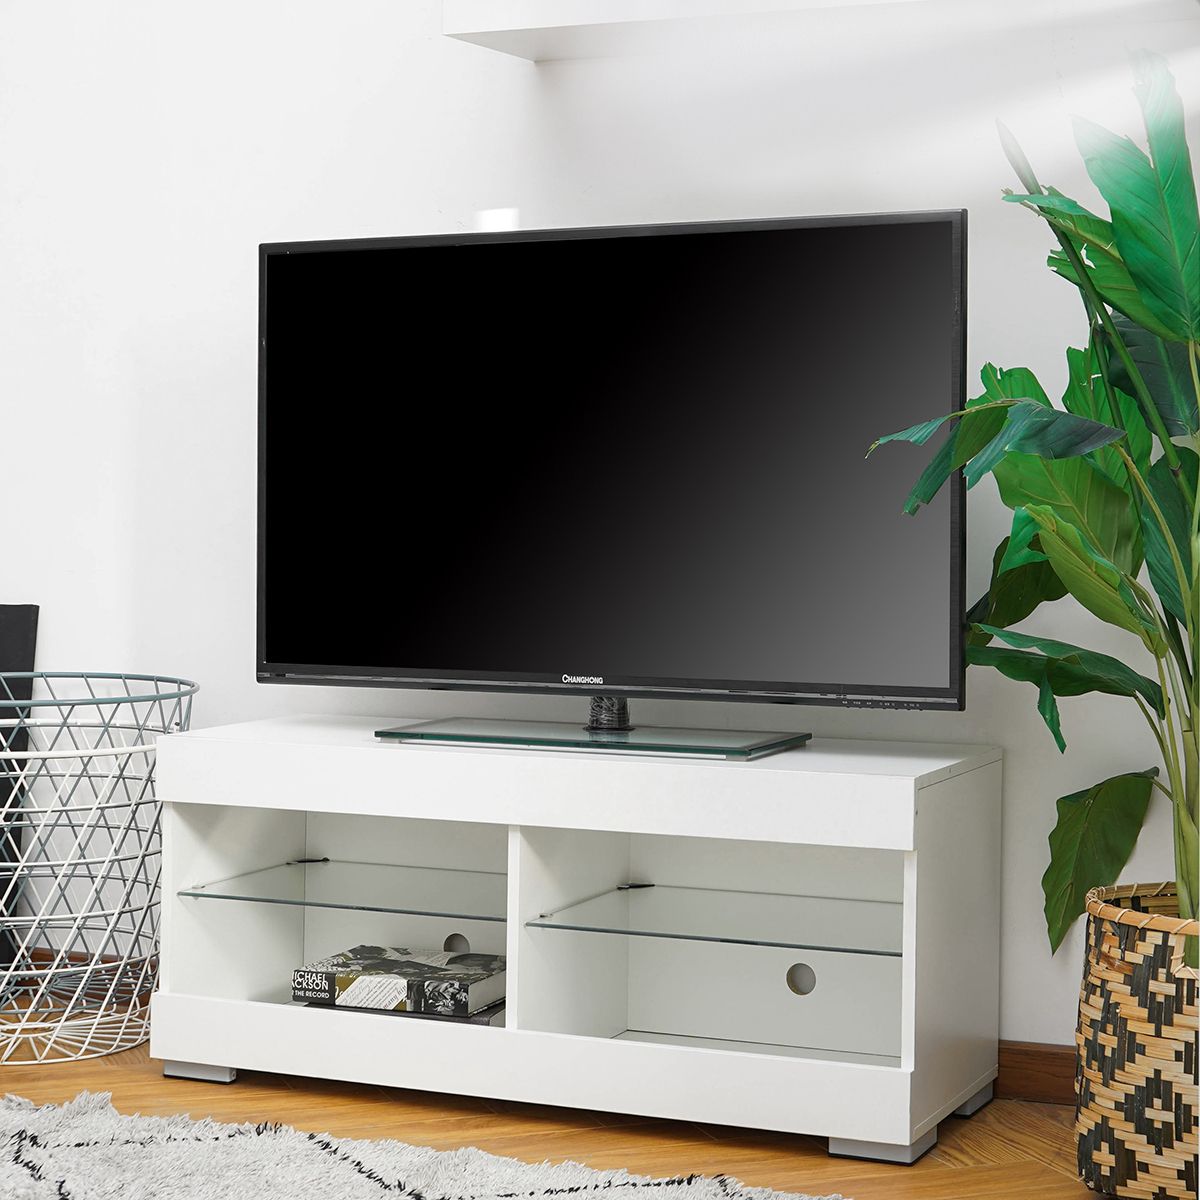 Wood Television Stand Modern Tv Stand Cabinet With Led Inside Glass Shelf With Tv Stands (View 5 of 15)